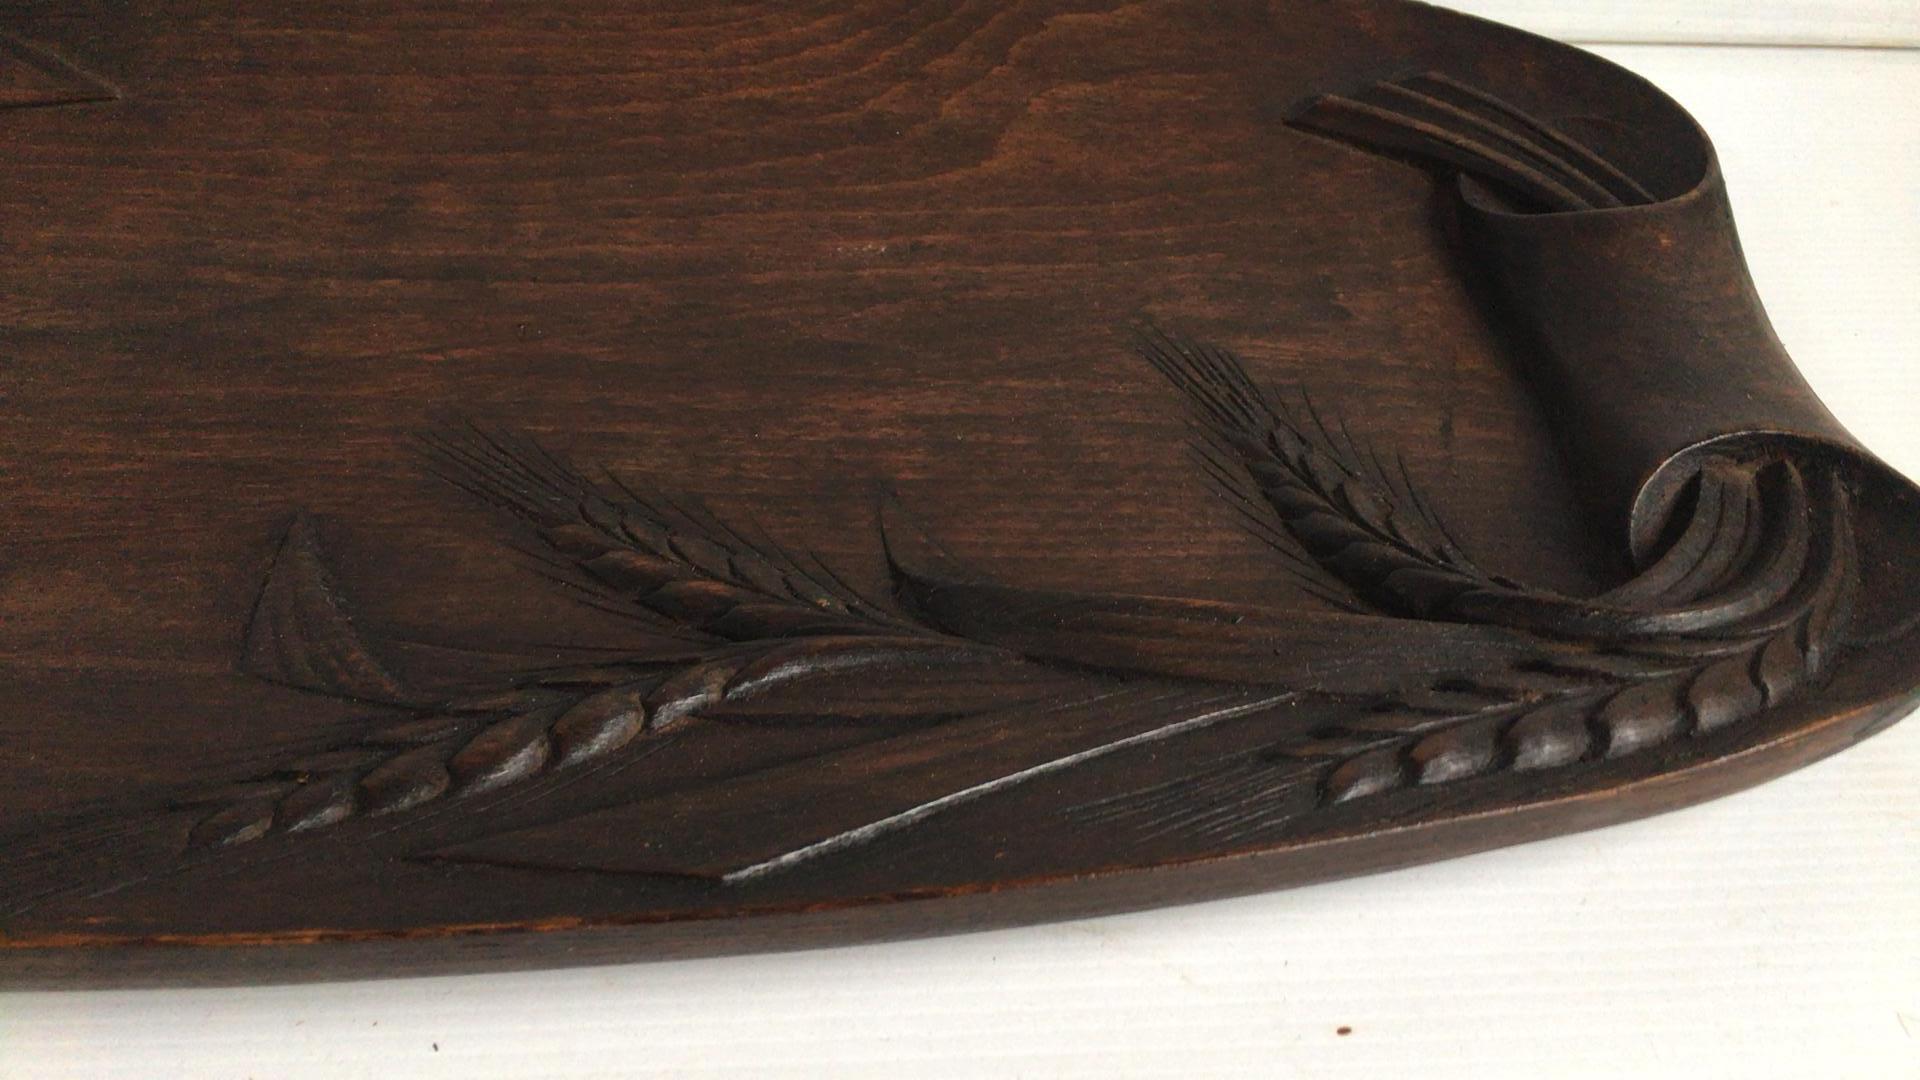 French carved wood bread platter with ear of wheat, circa 1900.
Measures: Lenght / 23.5 inches, large / 10.7 inches, height / 1.5 inches.